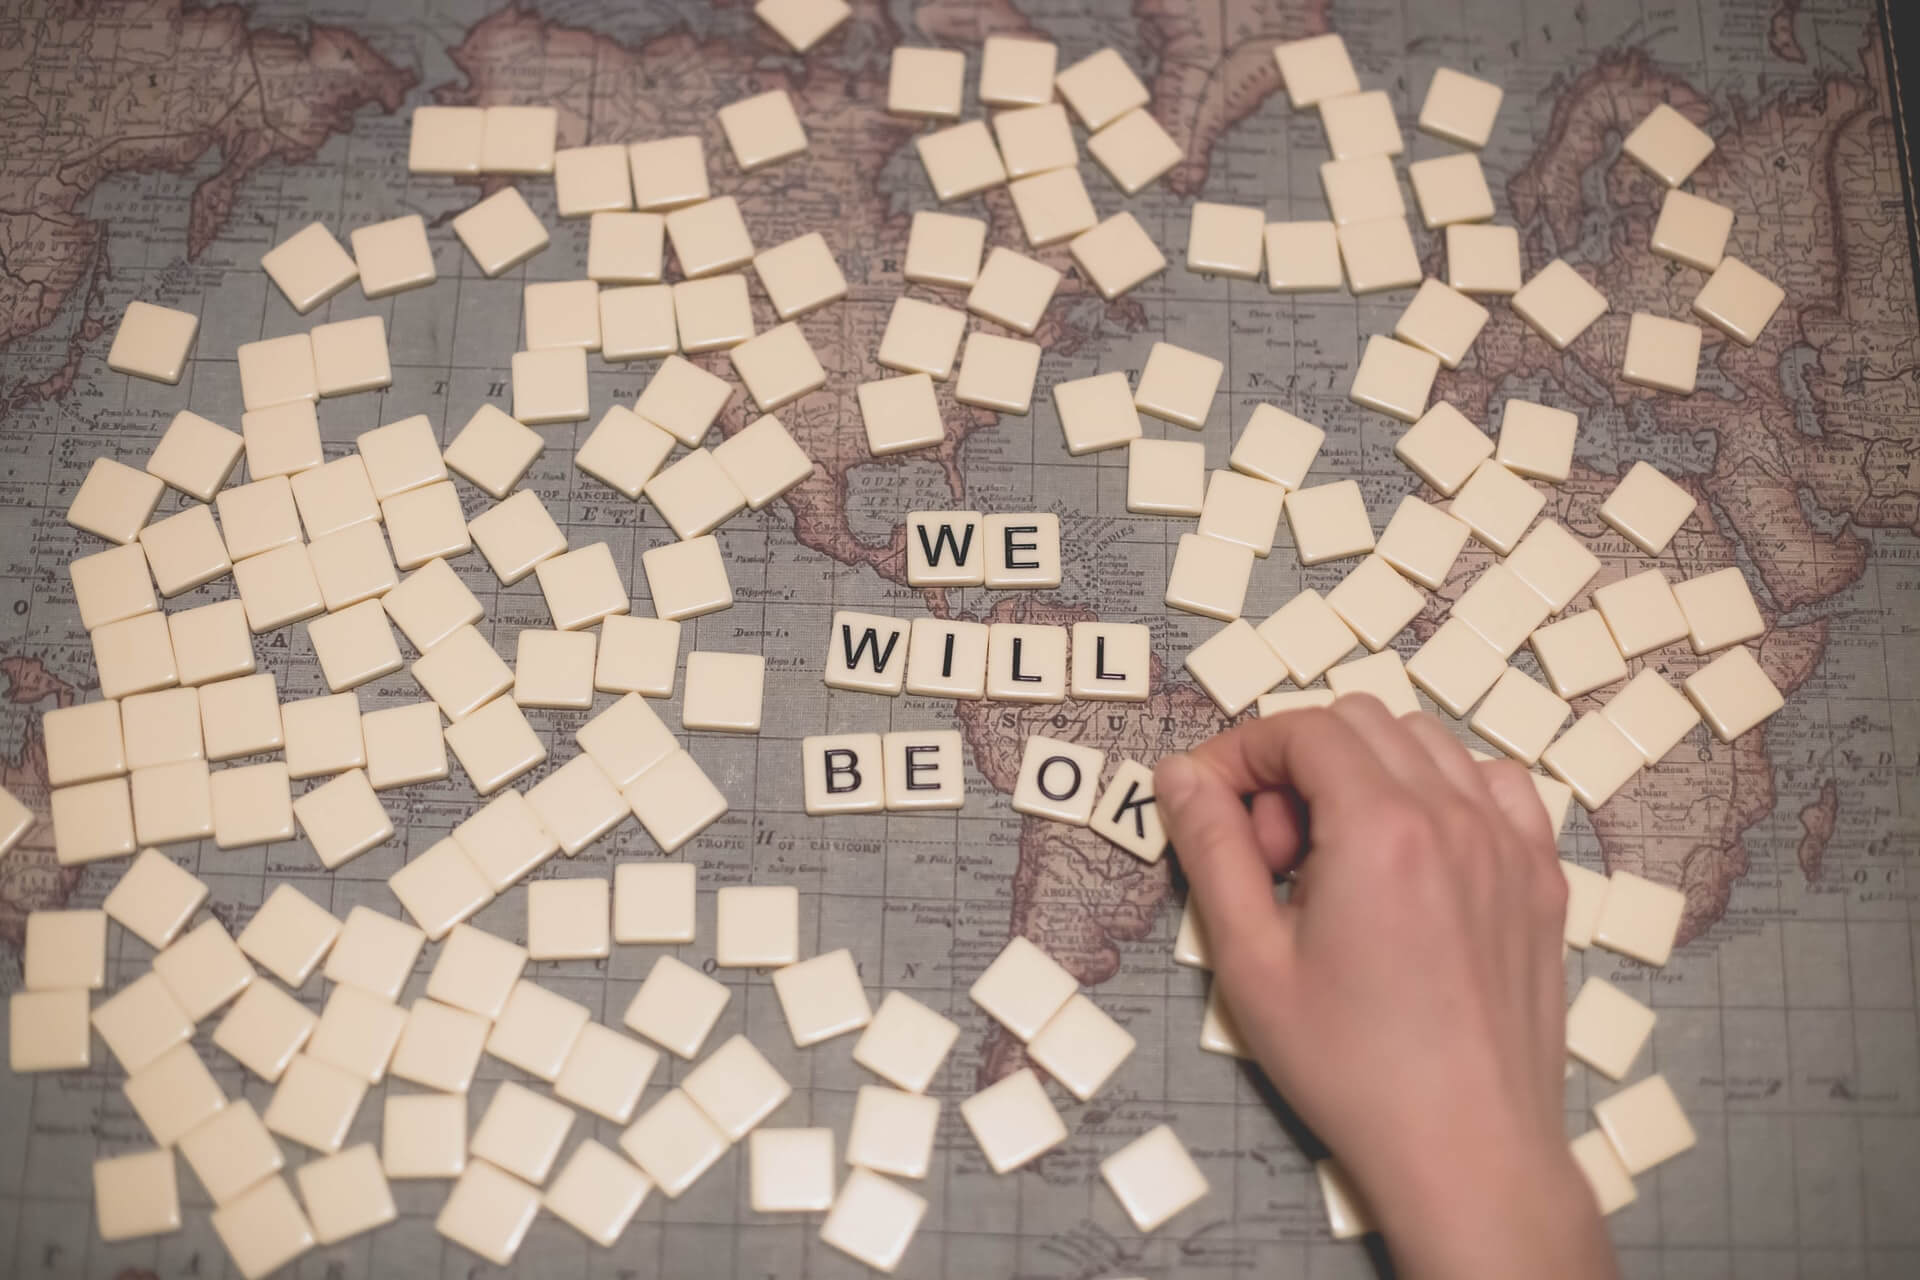 Placing out the words 'We Will be Ok' with scrabble tiles on a world map